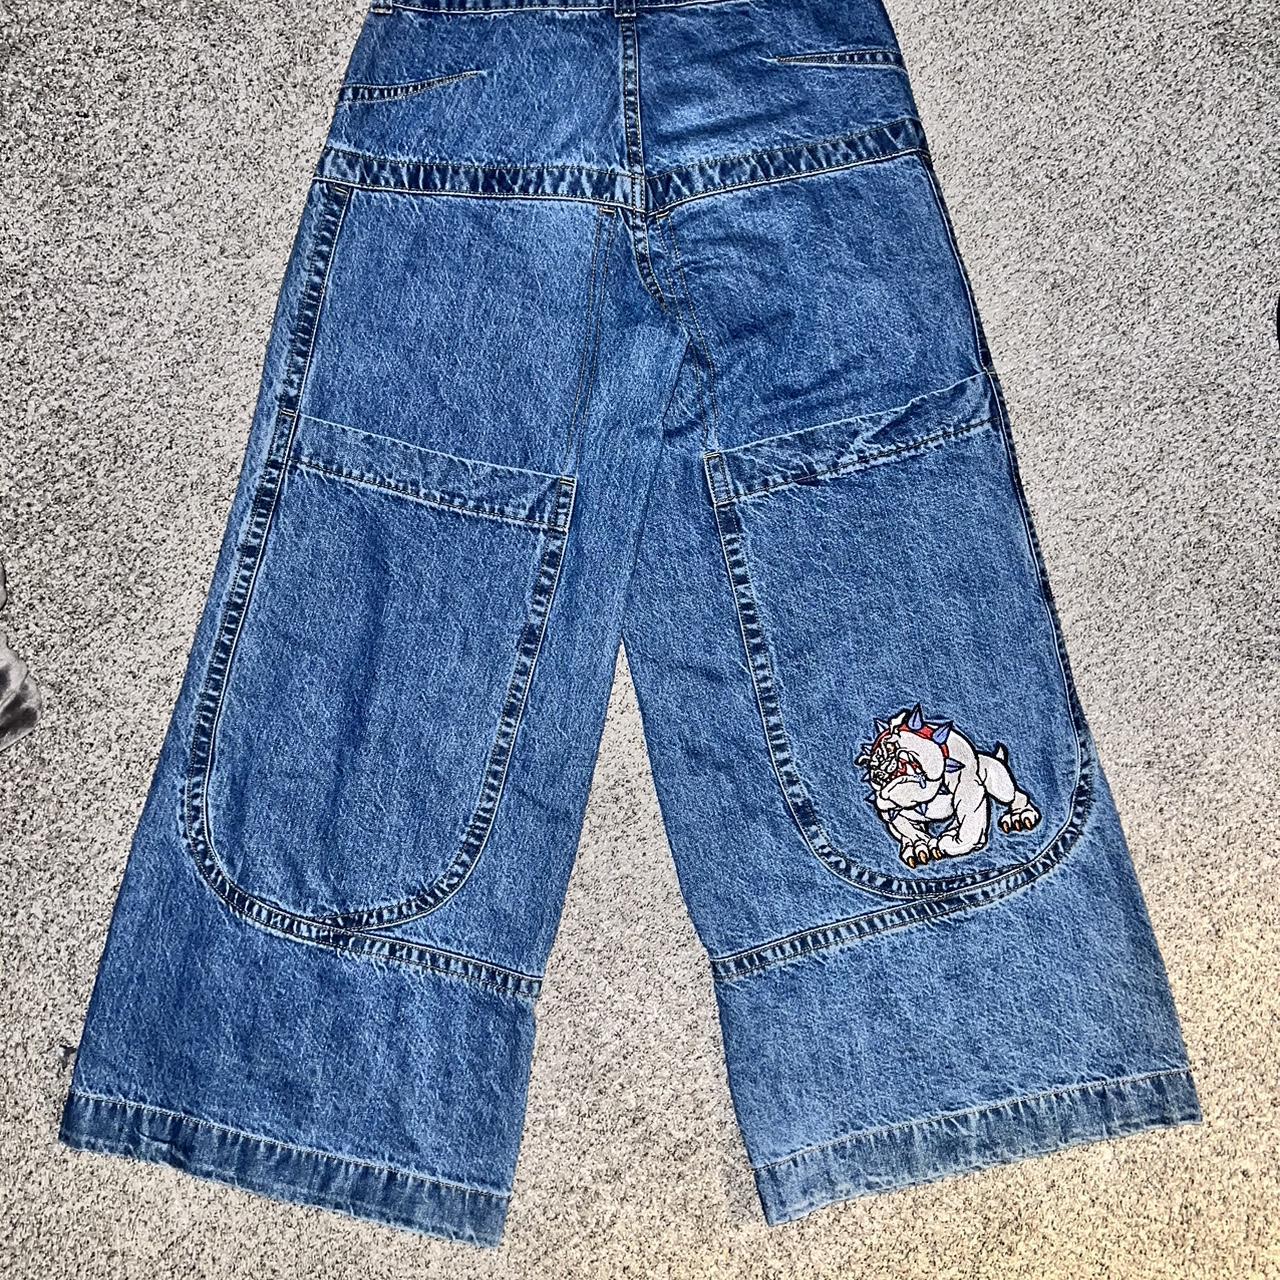 Grail jnco bulldog from the late 90s / early... - Depop